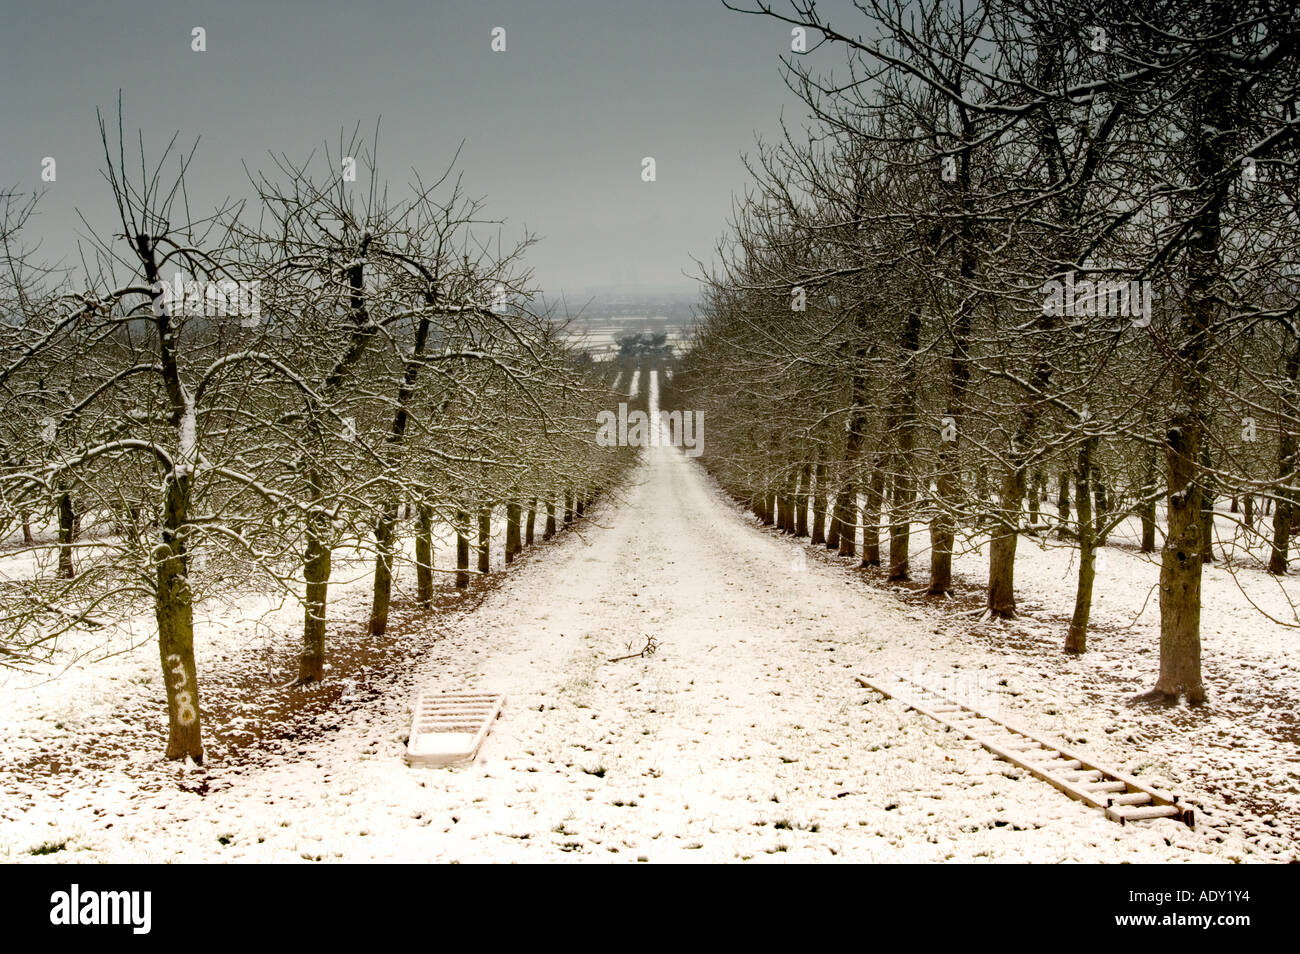 Apple trees in the snow at Almondsbury Cider orchard supplier of apples to Gaymers Cider Gloucestershire England Stock Photo